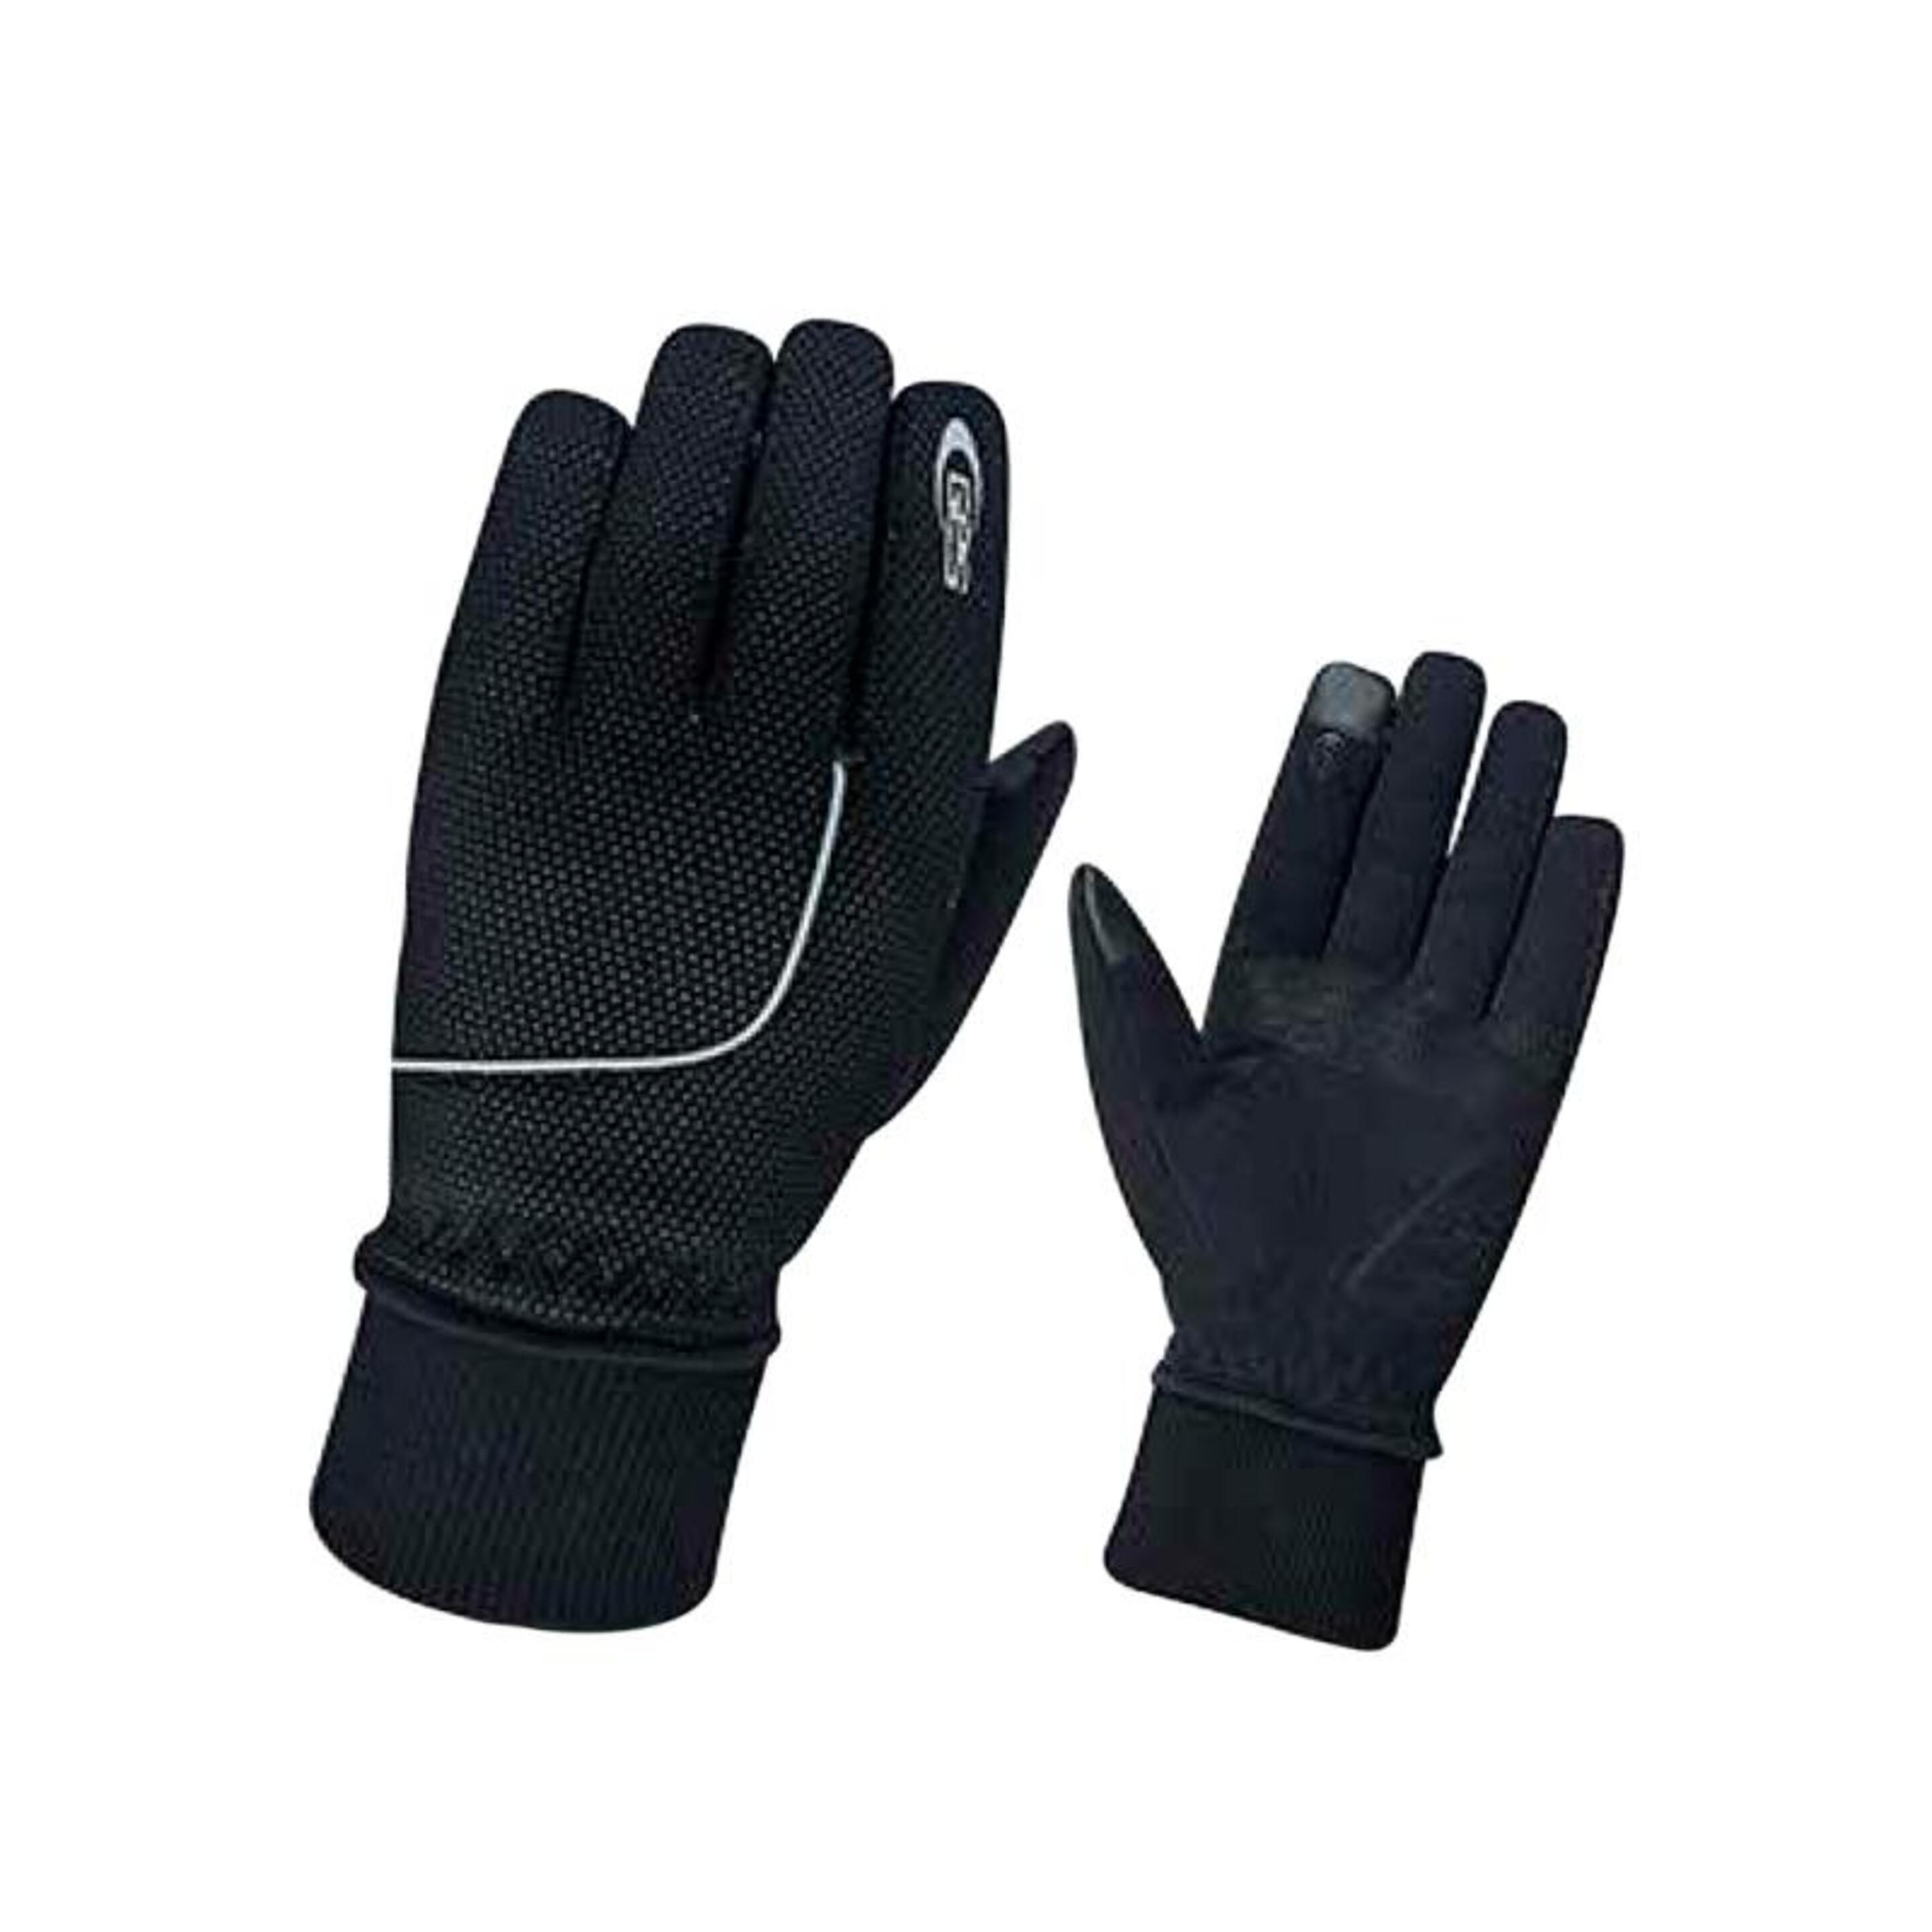 Guantes Ciclismo Ges Invierno Cooltech - Negro - Unisex  MKP